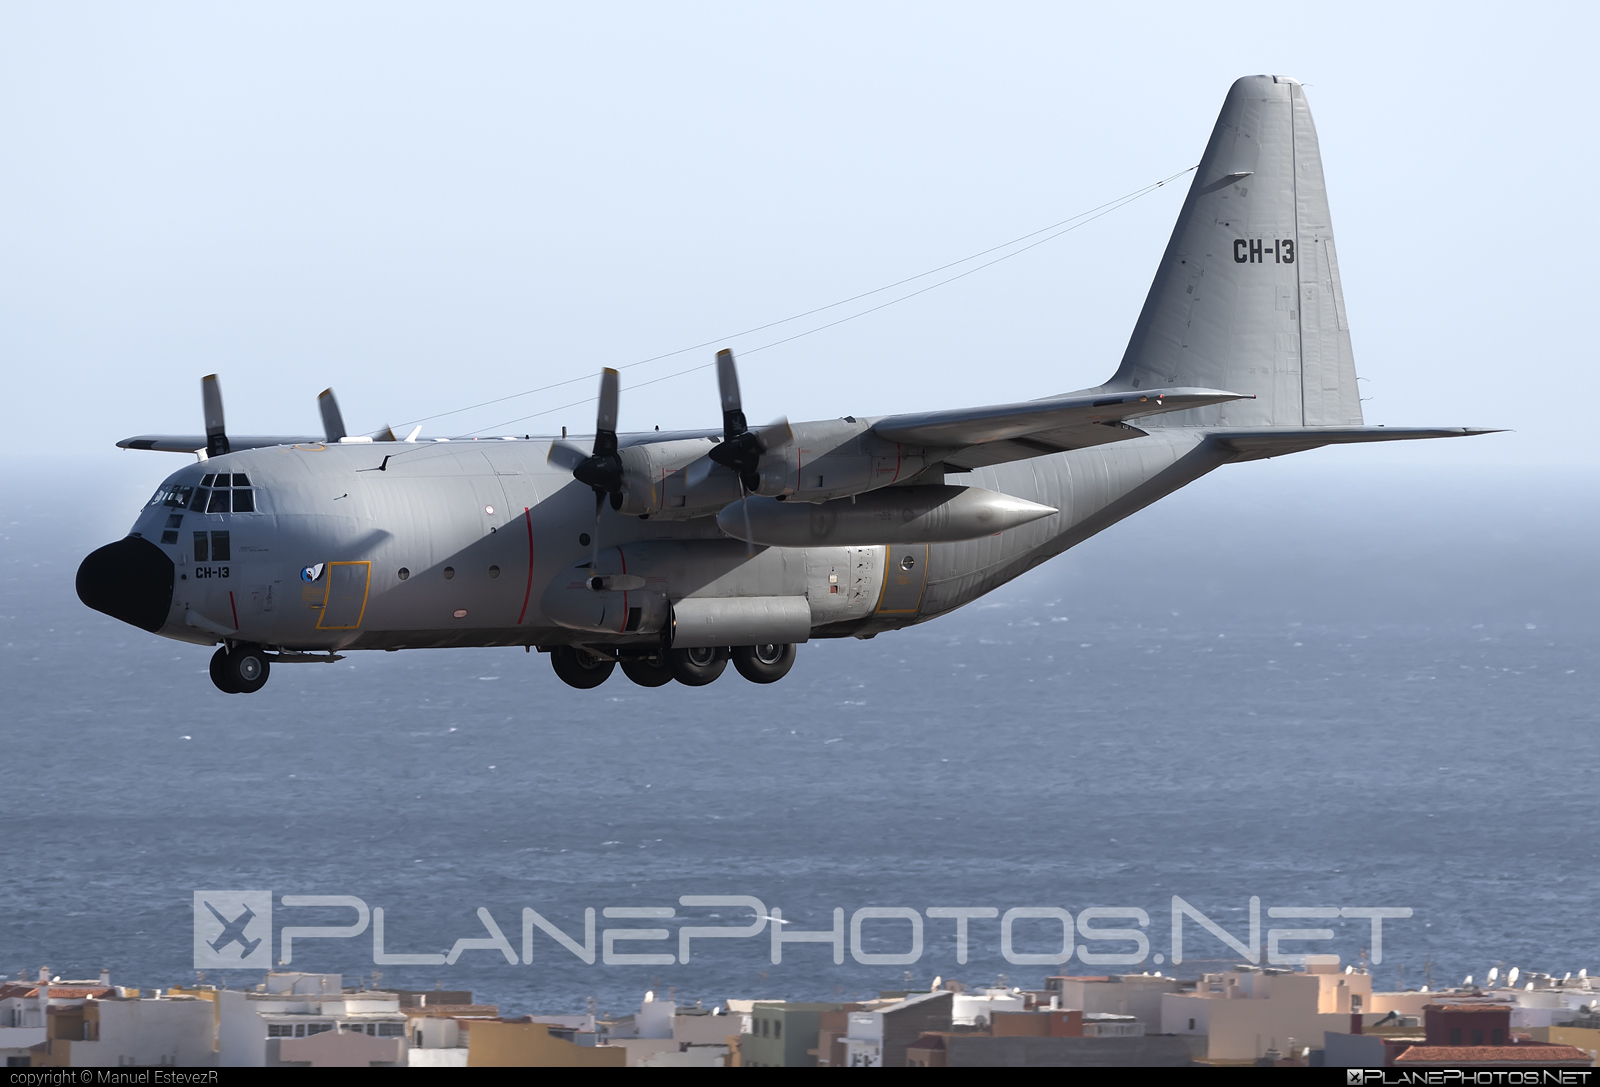 Lockheed C-130H-30 Hercules - CH-13 operated by Luchtcomponent (Belgian Air Force) #belgianairforce #lockheed #luchtcomponent